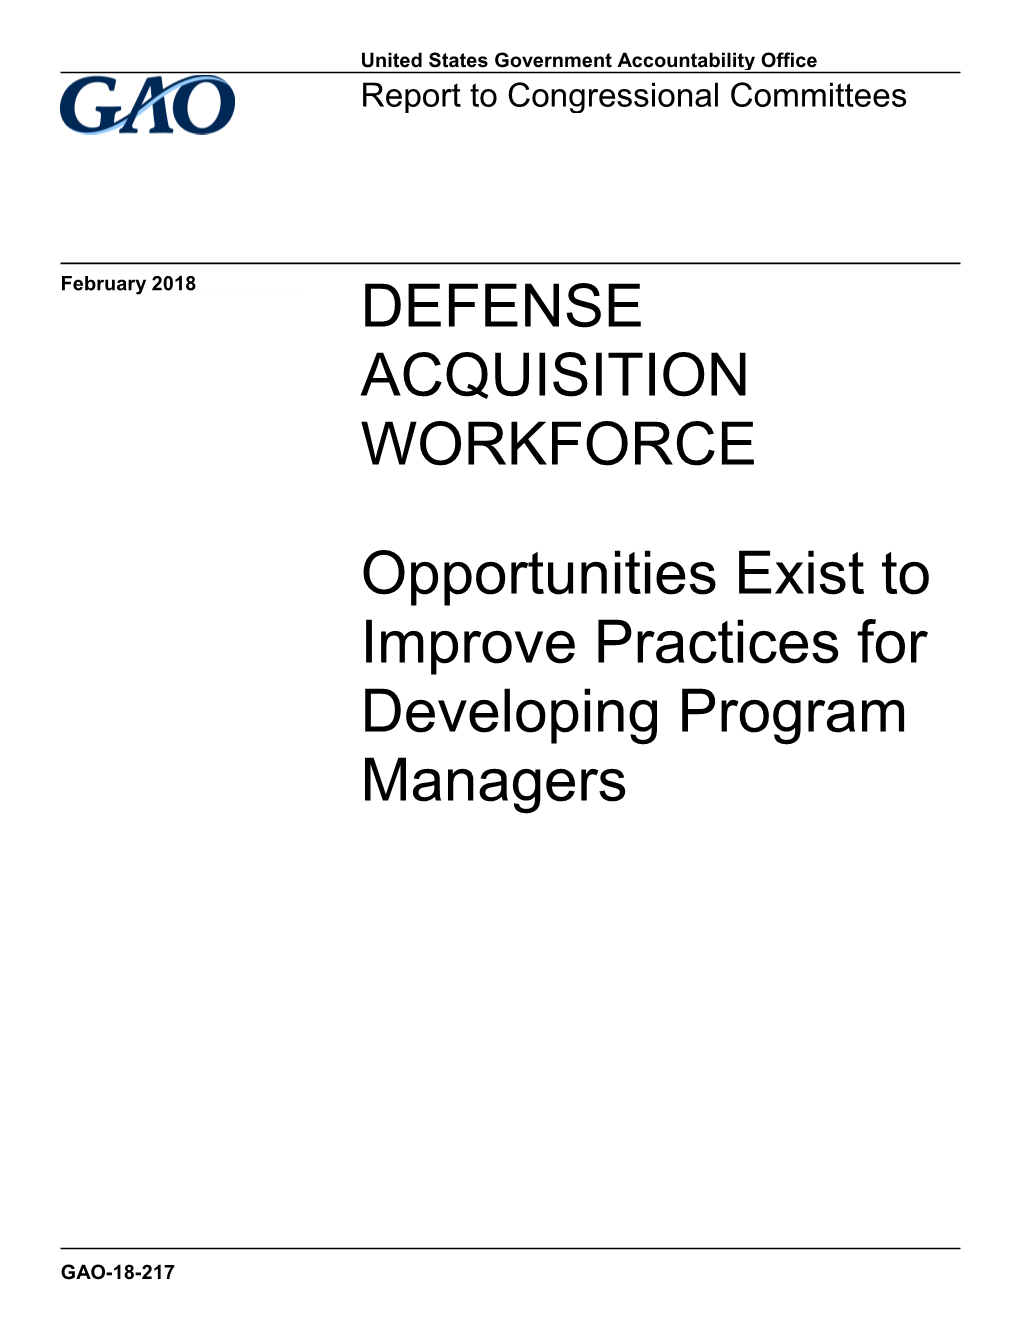 GAO-18-217 “Defense Acquisition Workforce: Opportunities Exist To